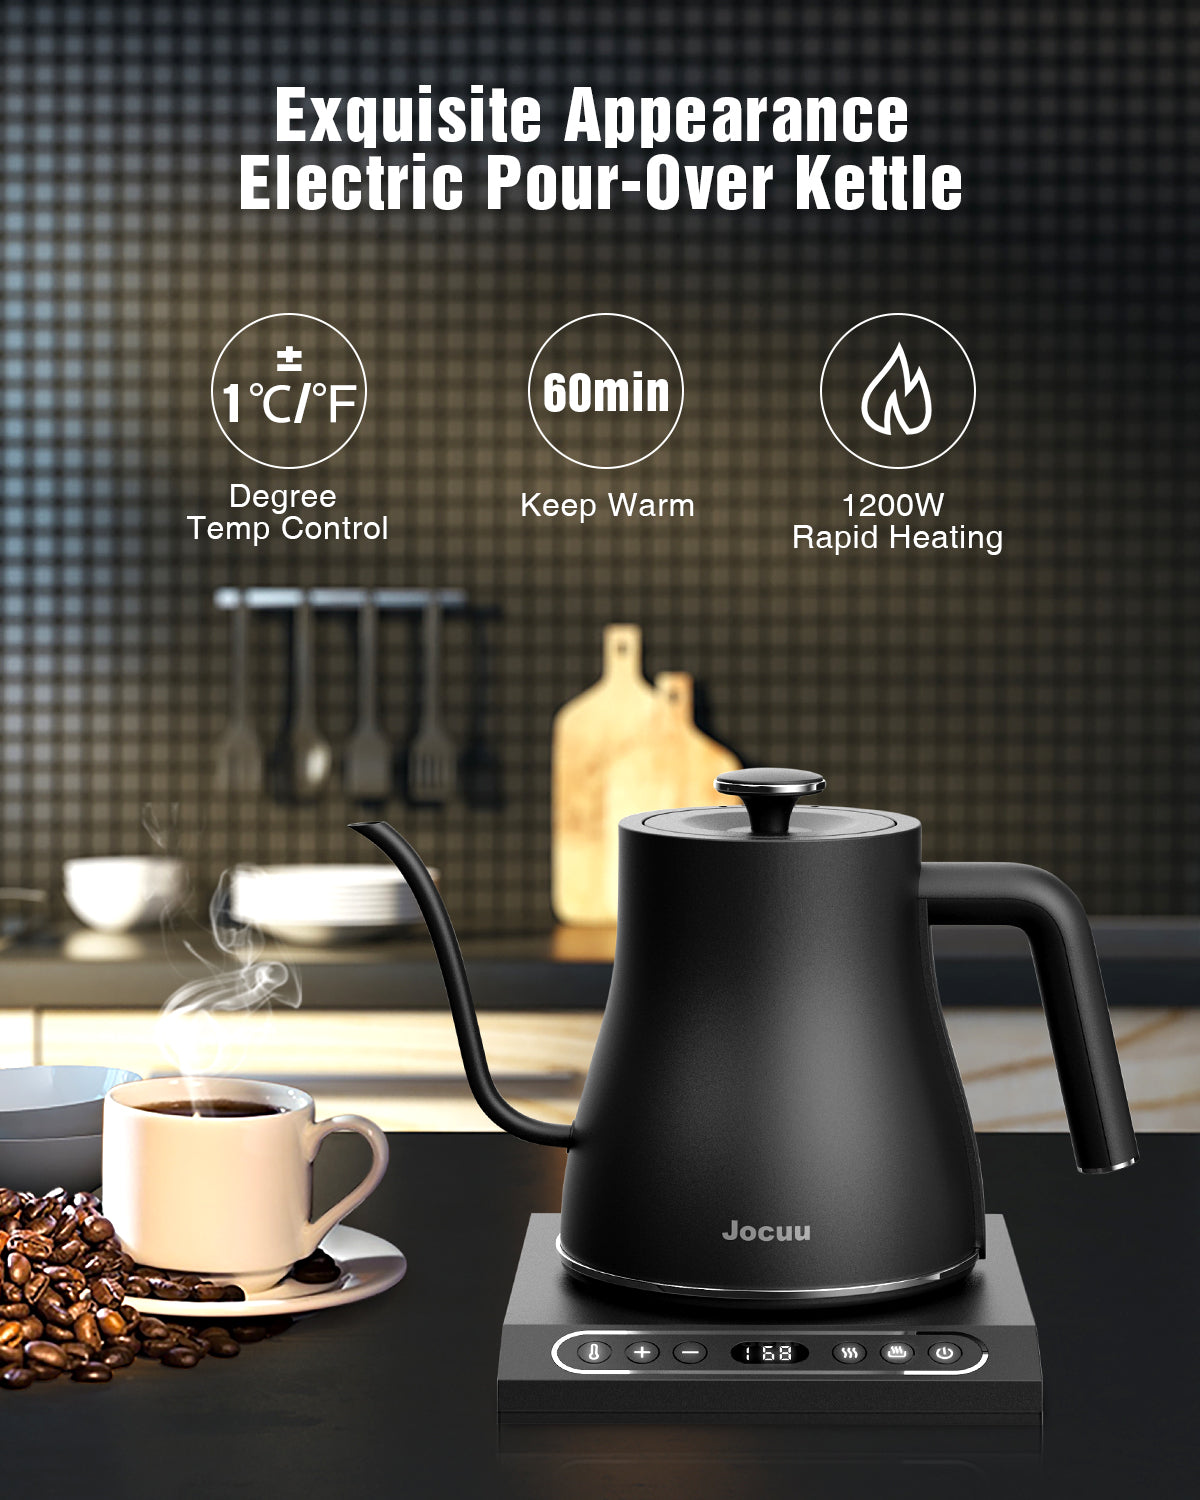 Jocuu Electric Kettle Unboxing & First Impression